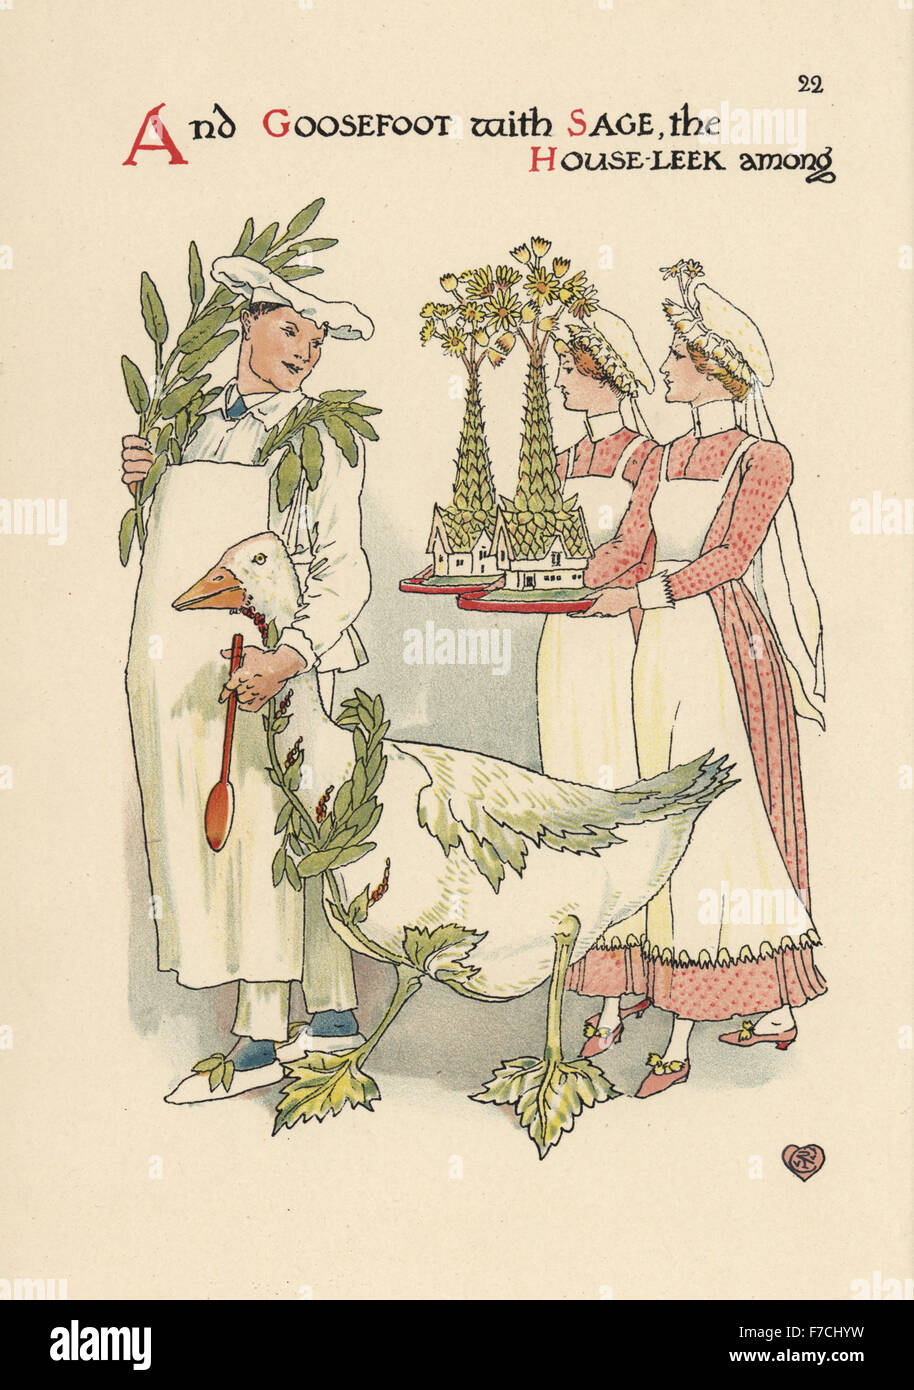 Flower fairies of goosefoot, Chenopodium album, as a chef in apron with ladle, sage, Salvia officinalis, and houseleek, Sempervivum tectorum, as maids. Chromolithograph after an illustration by Walter Crane from A Flower Wedding, Cassell, London, 1905. Stock Photo